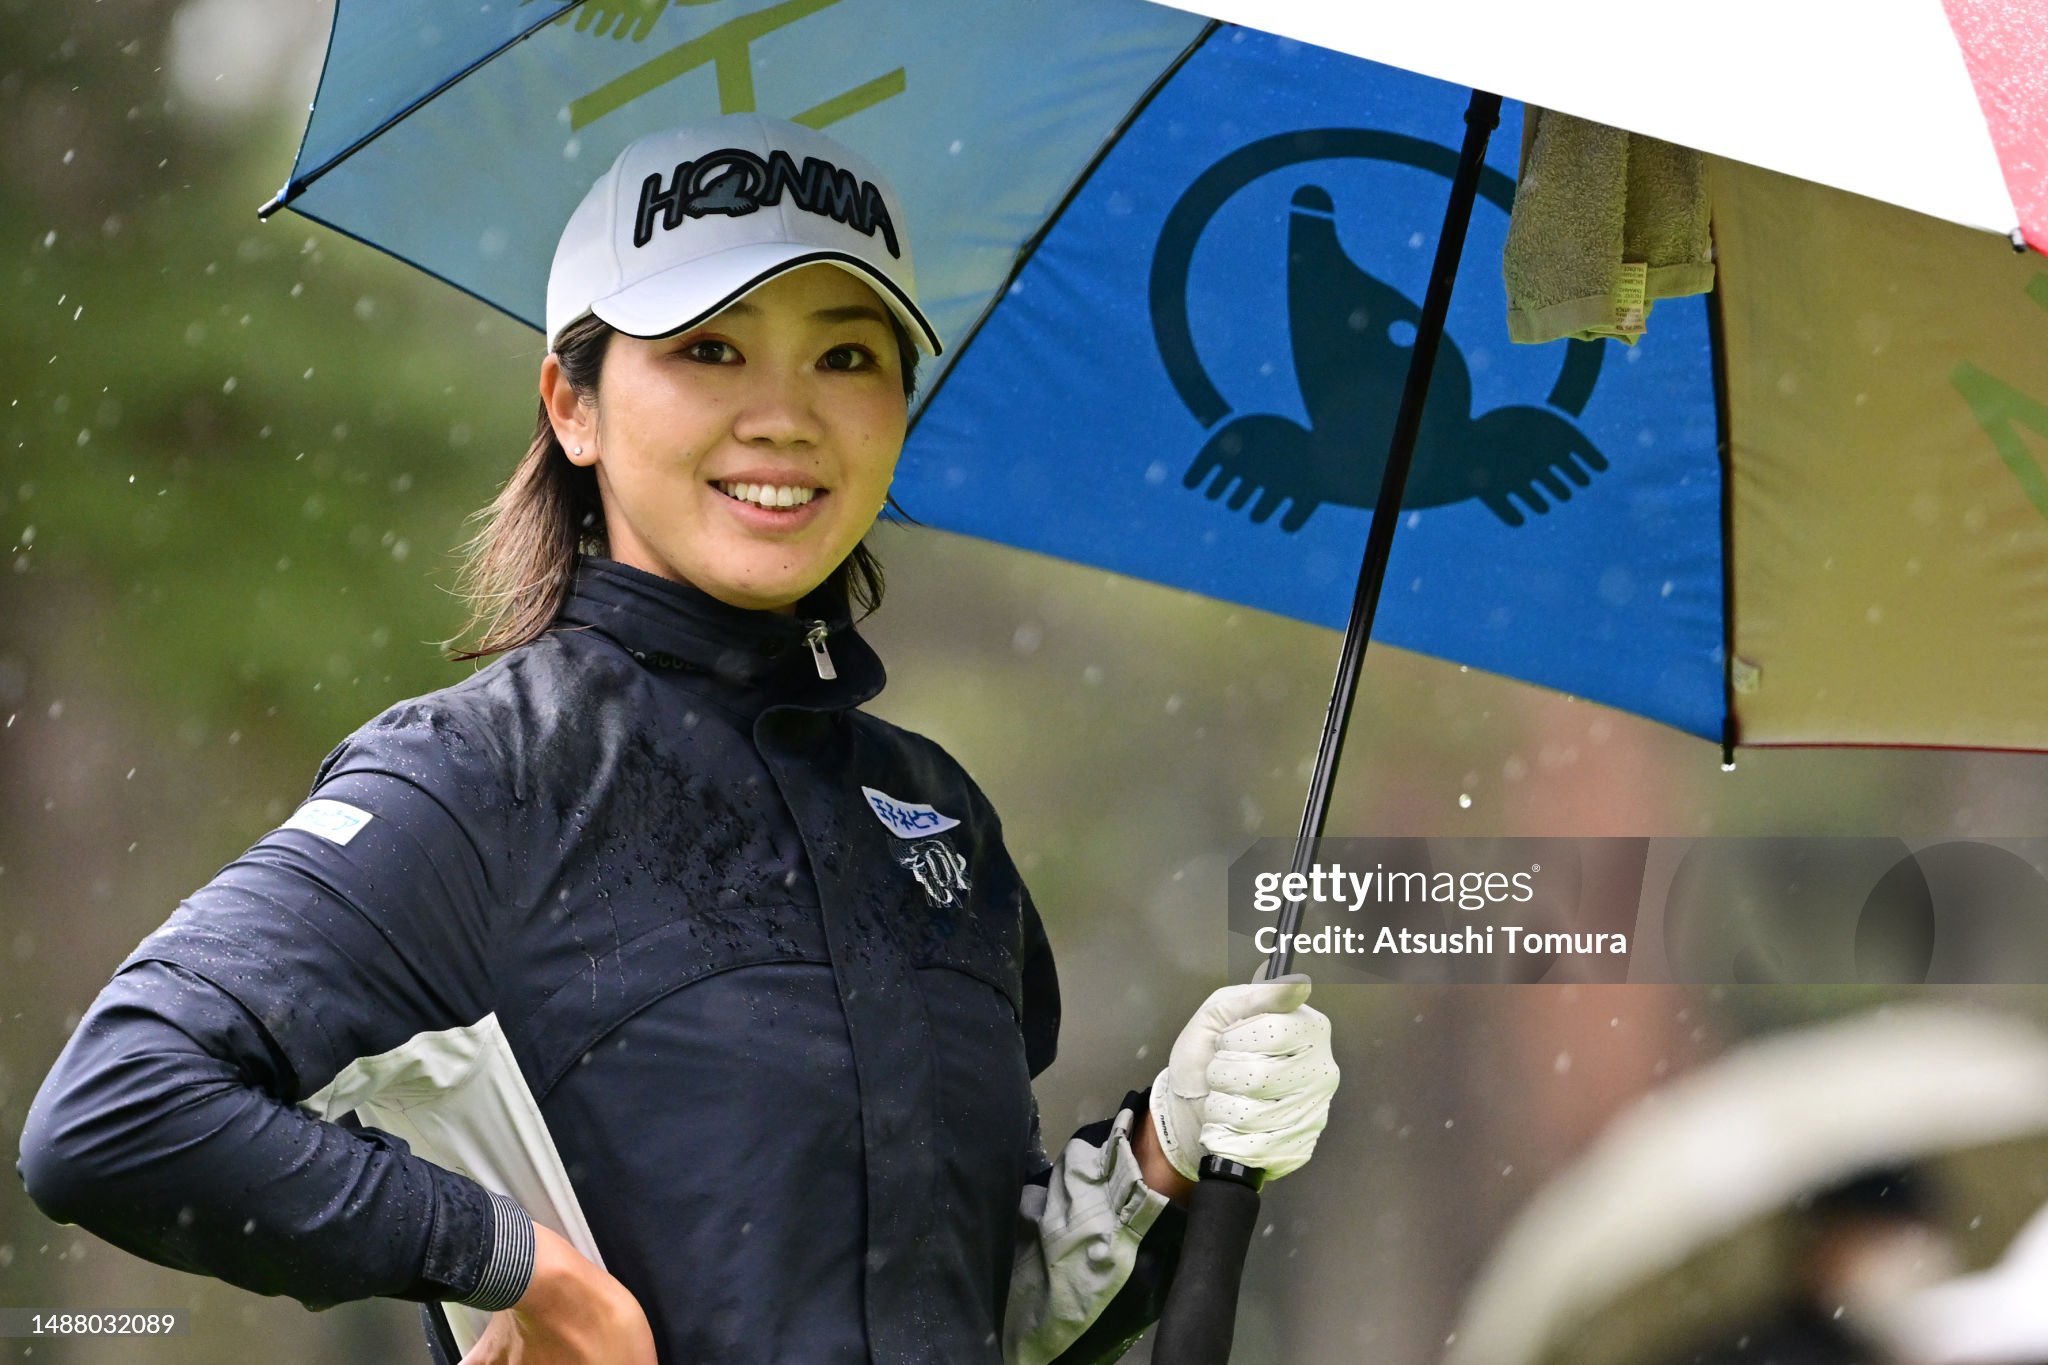 https://media.gettyimages.com/id/1488032089/photo/world-ladies-championship-salonpas-cup-final-round.jpg?s=2048x2048&w=gi&k=20&c=C_hj-0C4wVAICXes6rZ3pxu0gU2dRT-jy5YIwhERjHE=